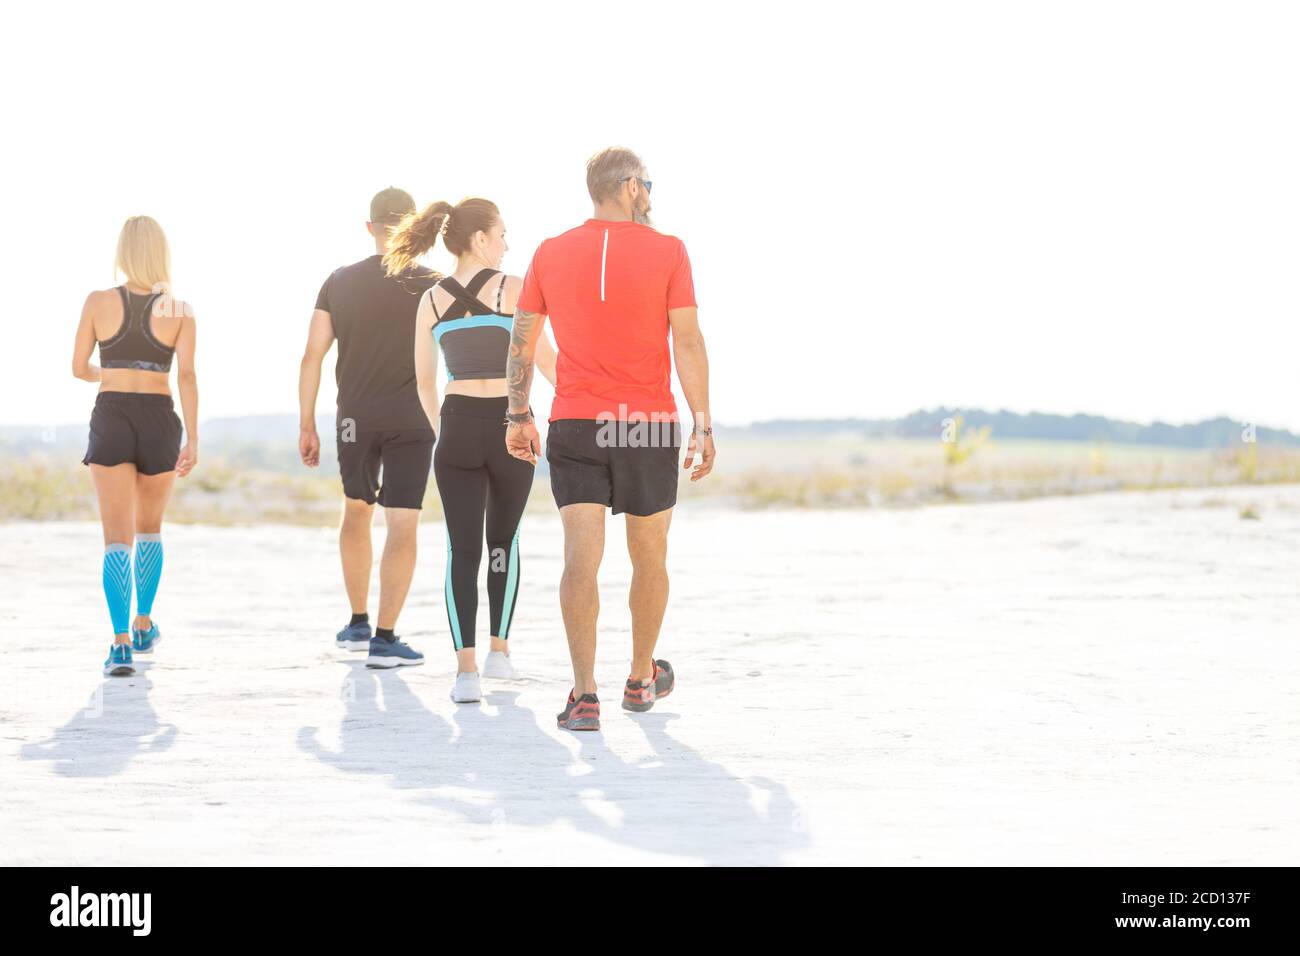 Group of four runners walk on sandy desert land. concept runners image with copy space Stock Photo